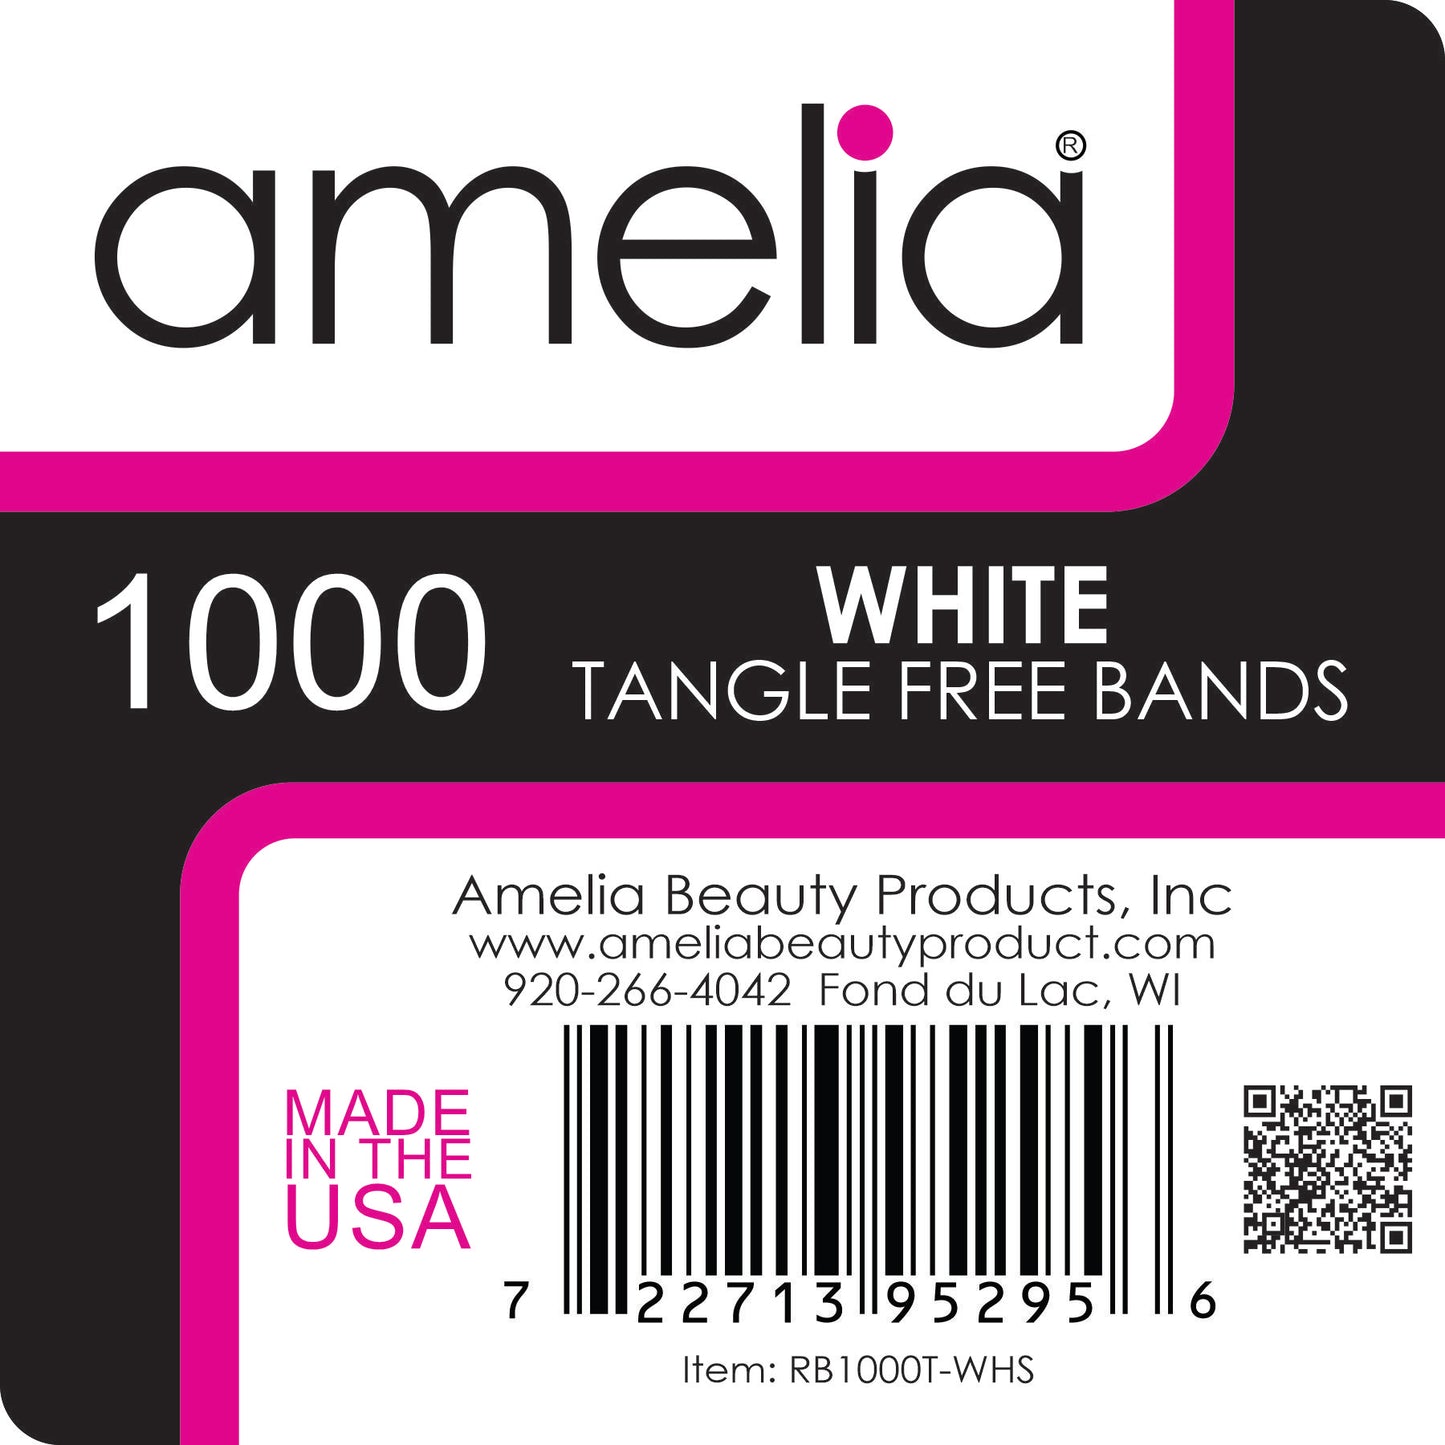 Amelia Beauty | 1/2in, White, Tangle Free Elastic Pony Tail Holders | Made in USA, Ideal for Ponytails, Braids, Twists. For Women, Girls. Pain Free, Snag Free, Easy Off | 1000 Pack